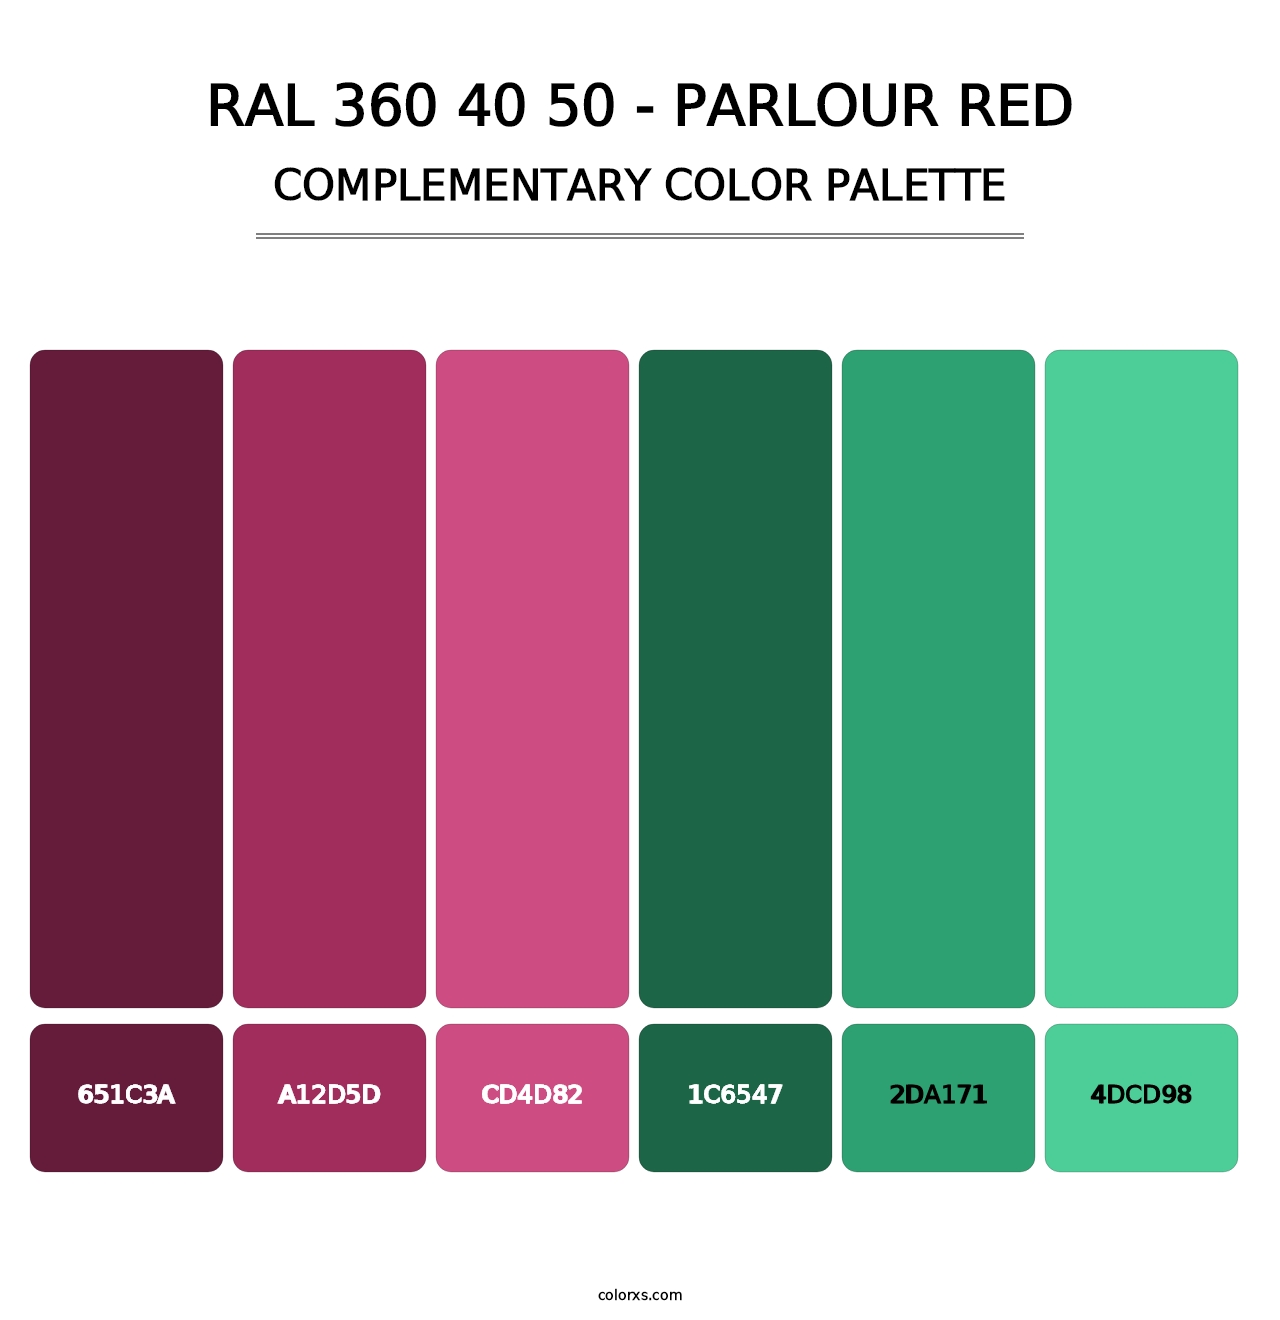 RAL 360 40 50 - Parlour Red - Complementary Color Palette